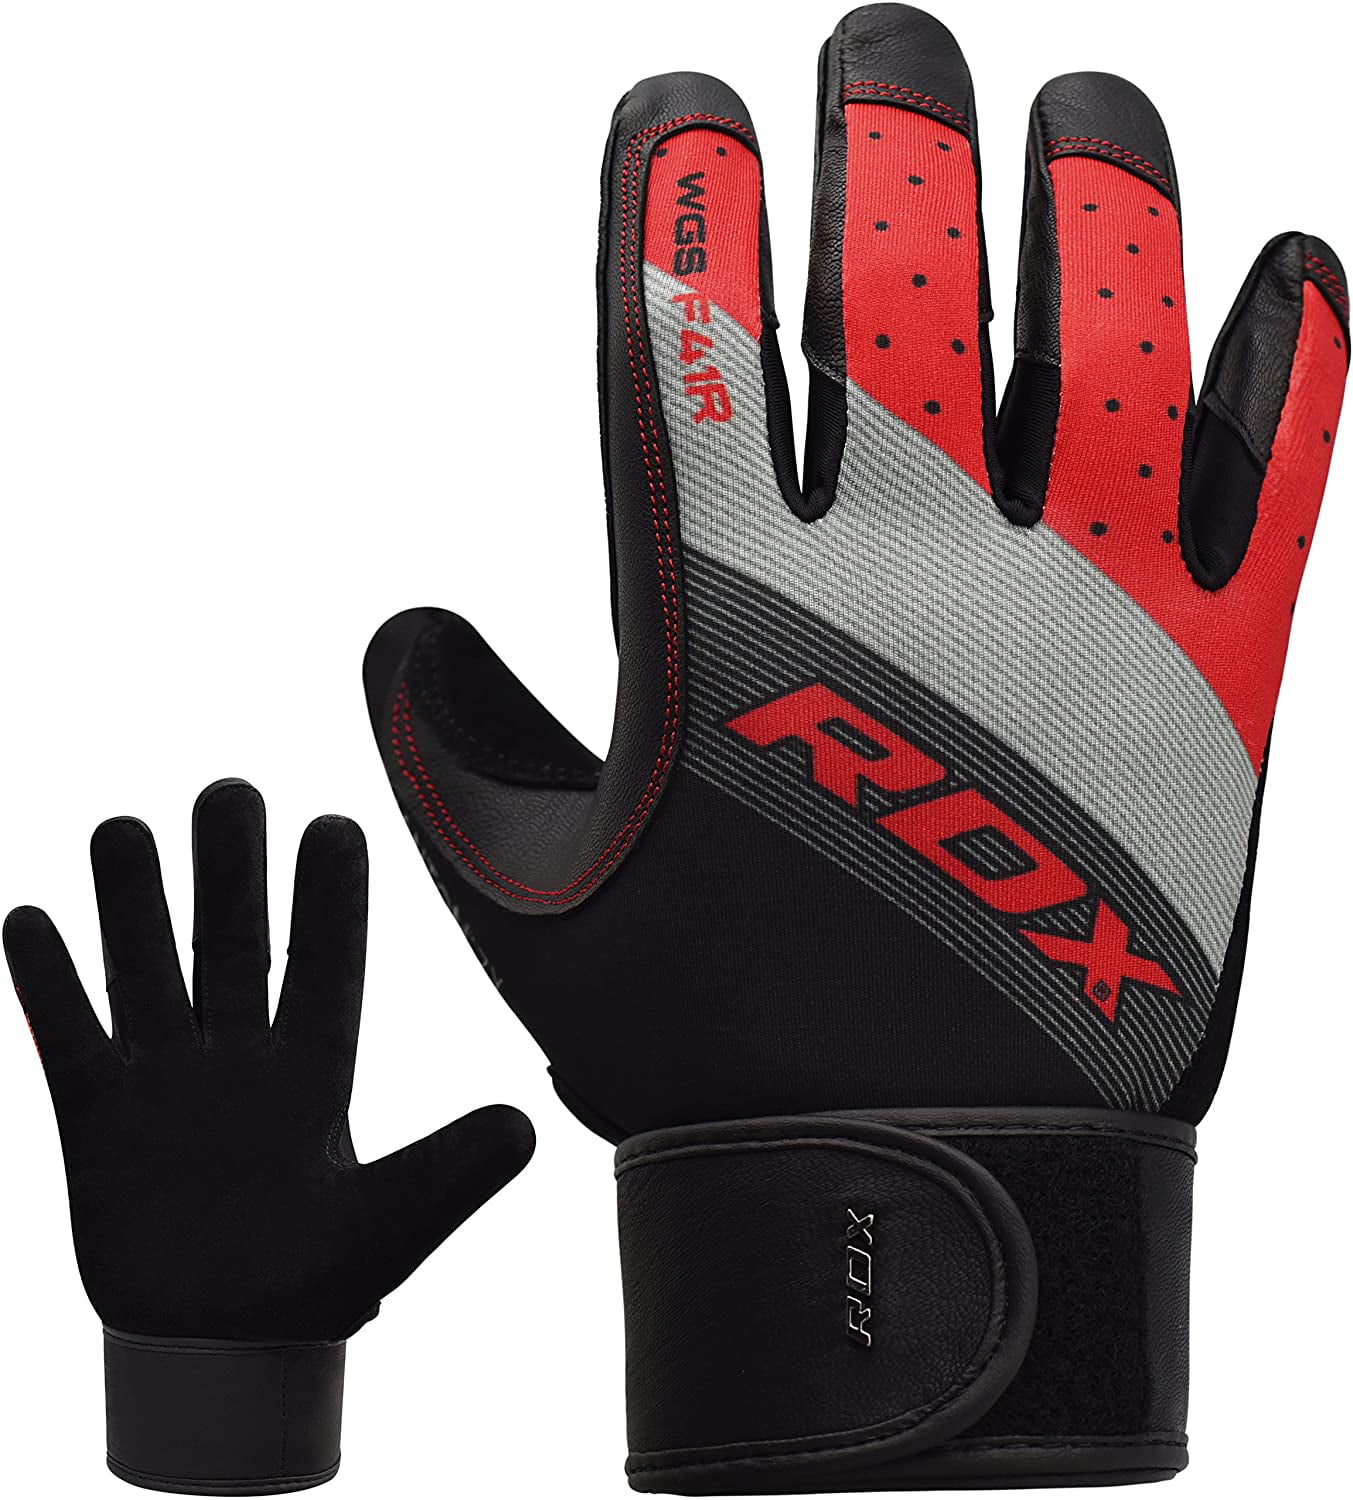 Great for Exercise Long Wrist Support with Anti Slip Palm Protection RDX Weight Lifting Full Finger Gym Gloves for Fitness Workout – Breathable Powerlifting and Strength Training Bodybuilding